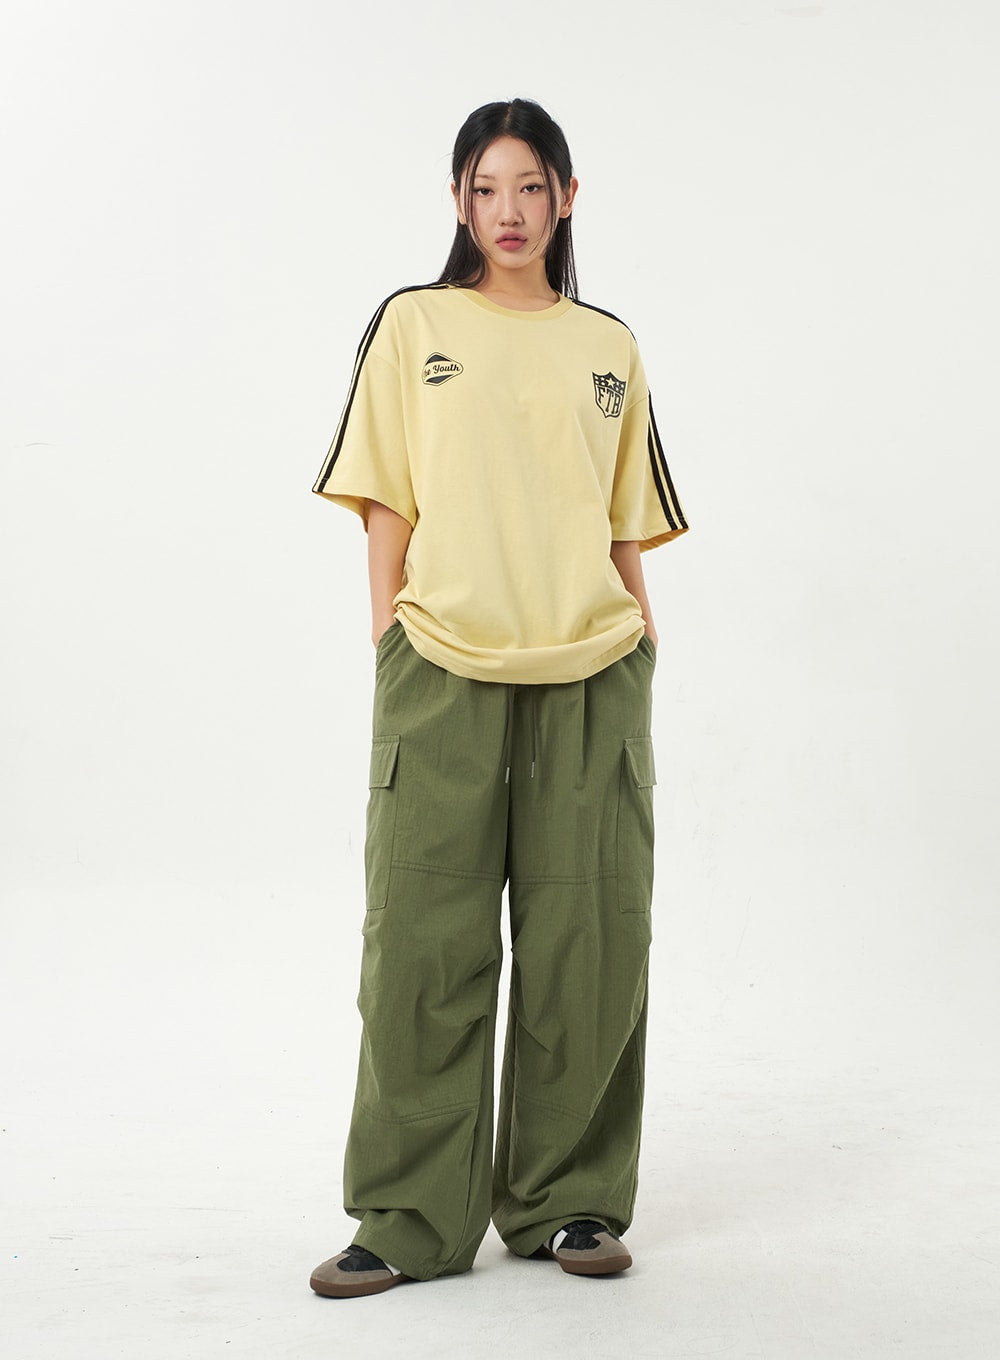 Girl In Green Cargo Pants And A T-shirt Stock Photo, Picture And Royalty  Free Image. Image 133038150.